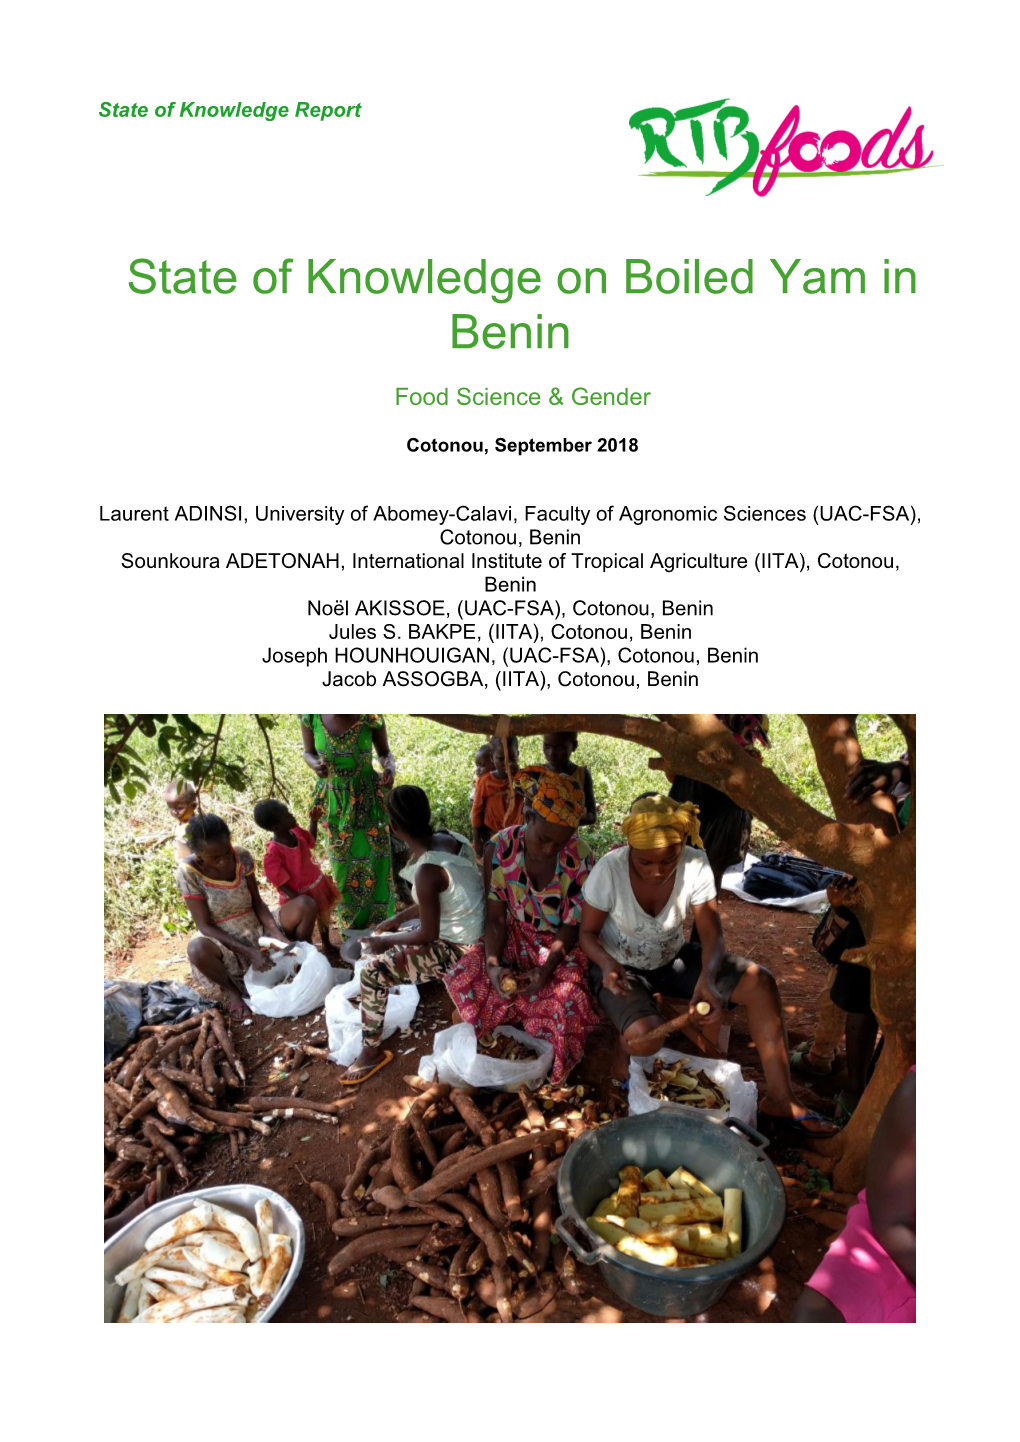 State of Knowledge on Boiled Yam in Benin